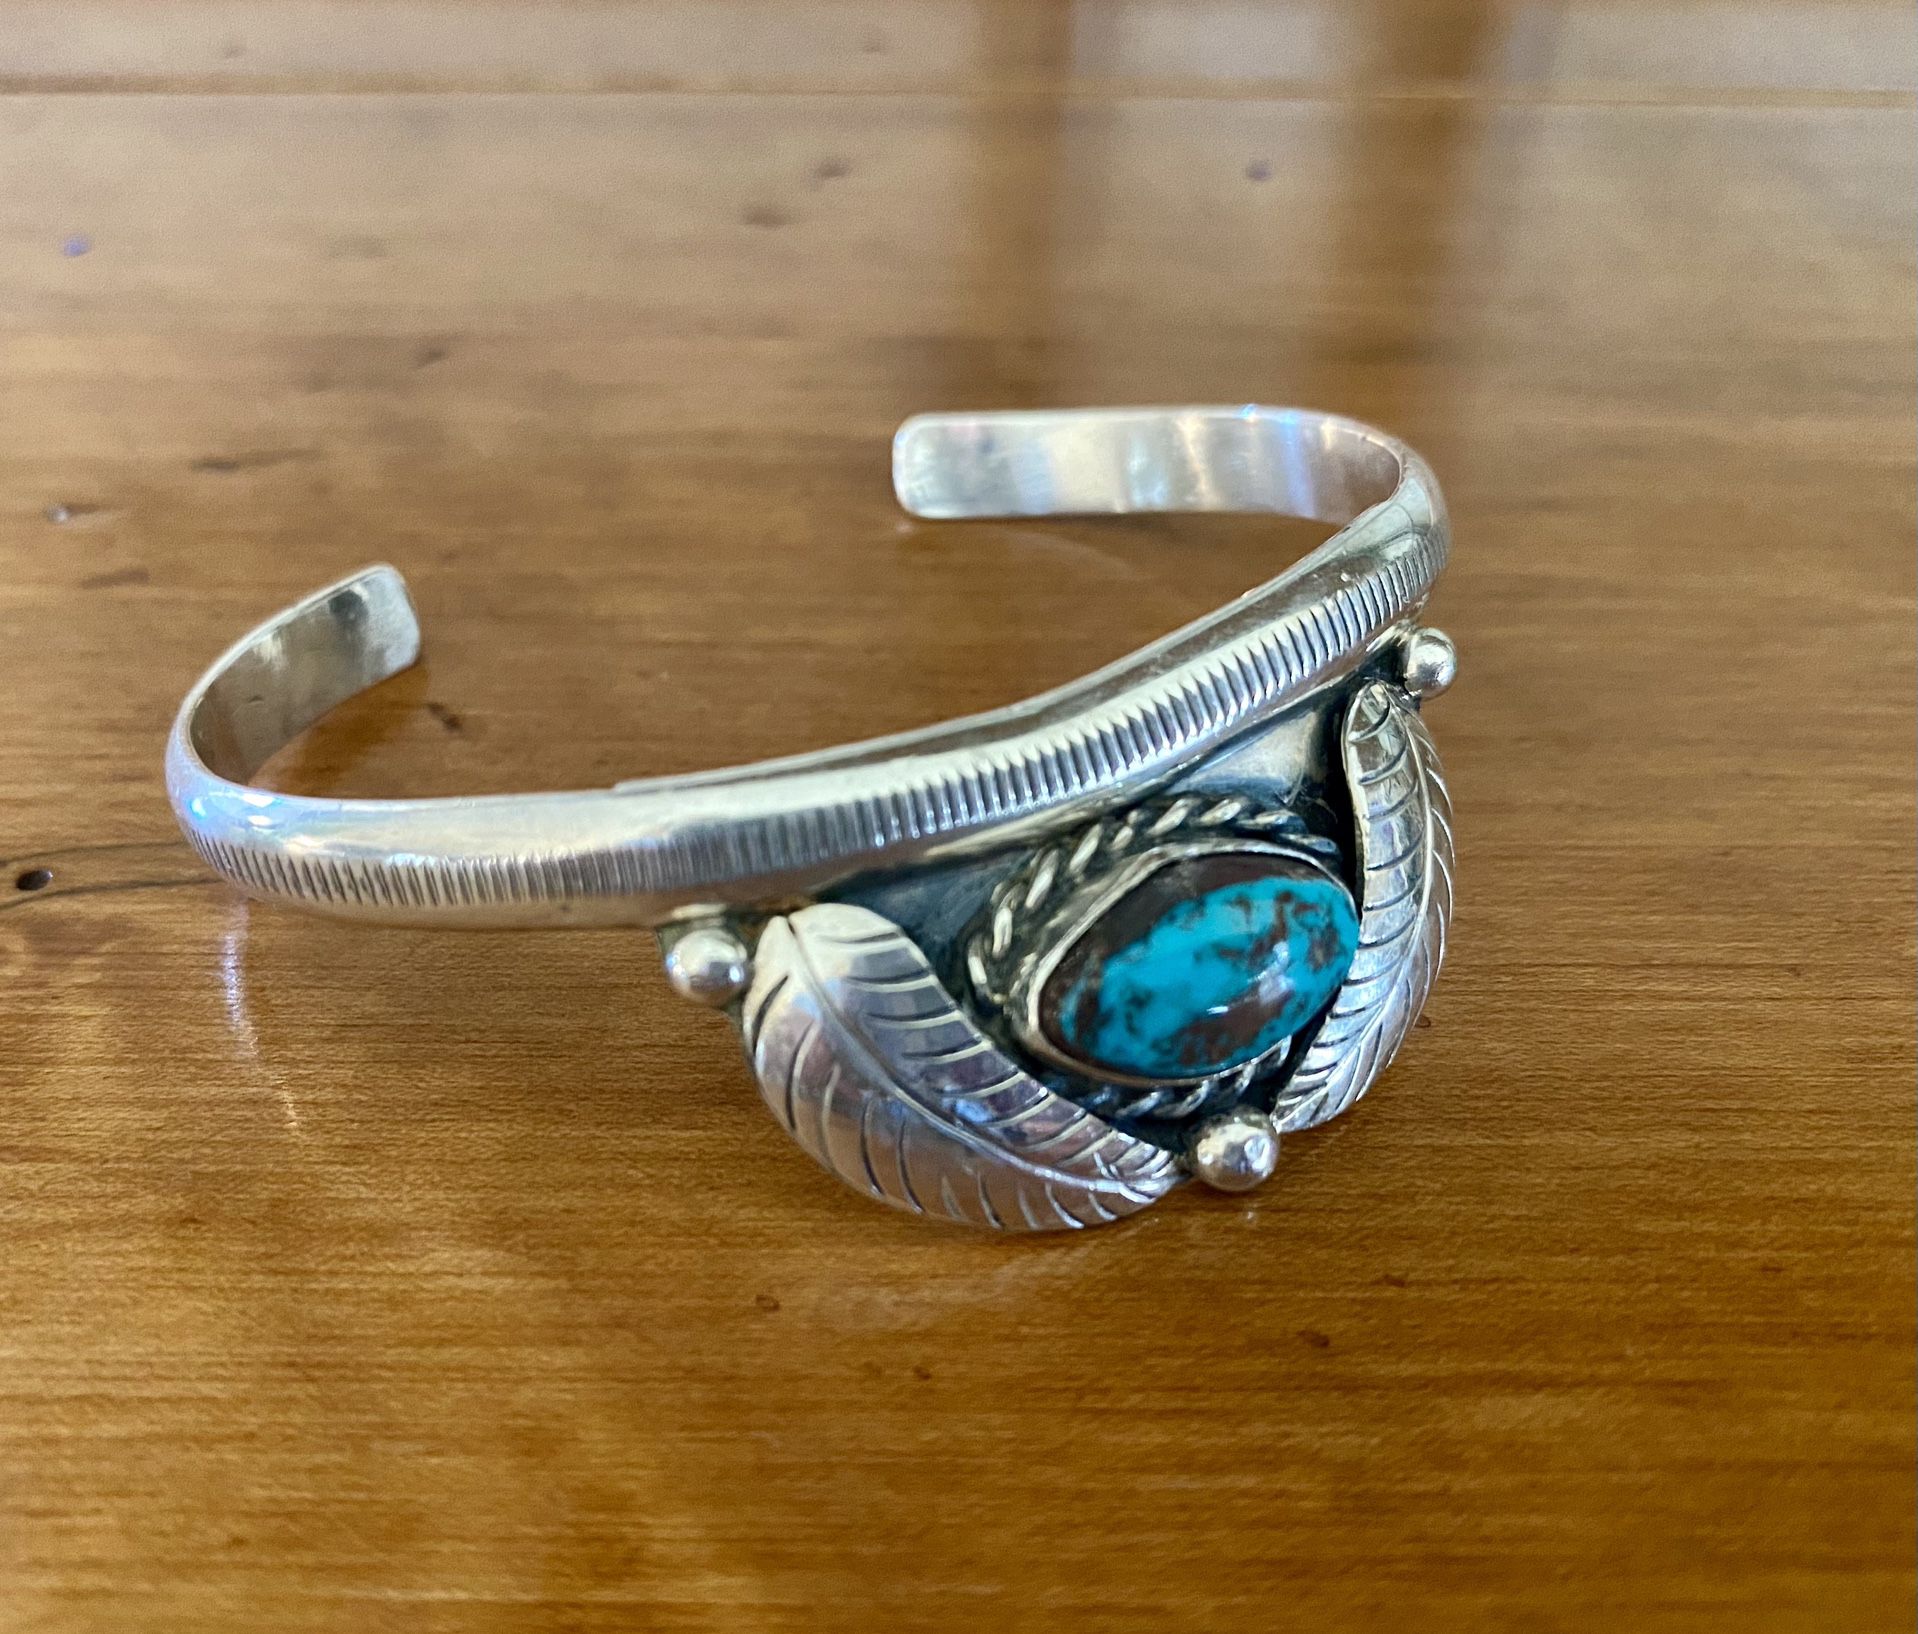 Vintage Native American Sterling Silver and Turquoise Cuff Bracelet size 6.5”